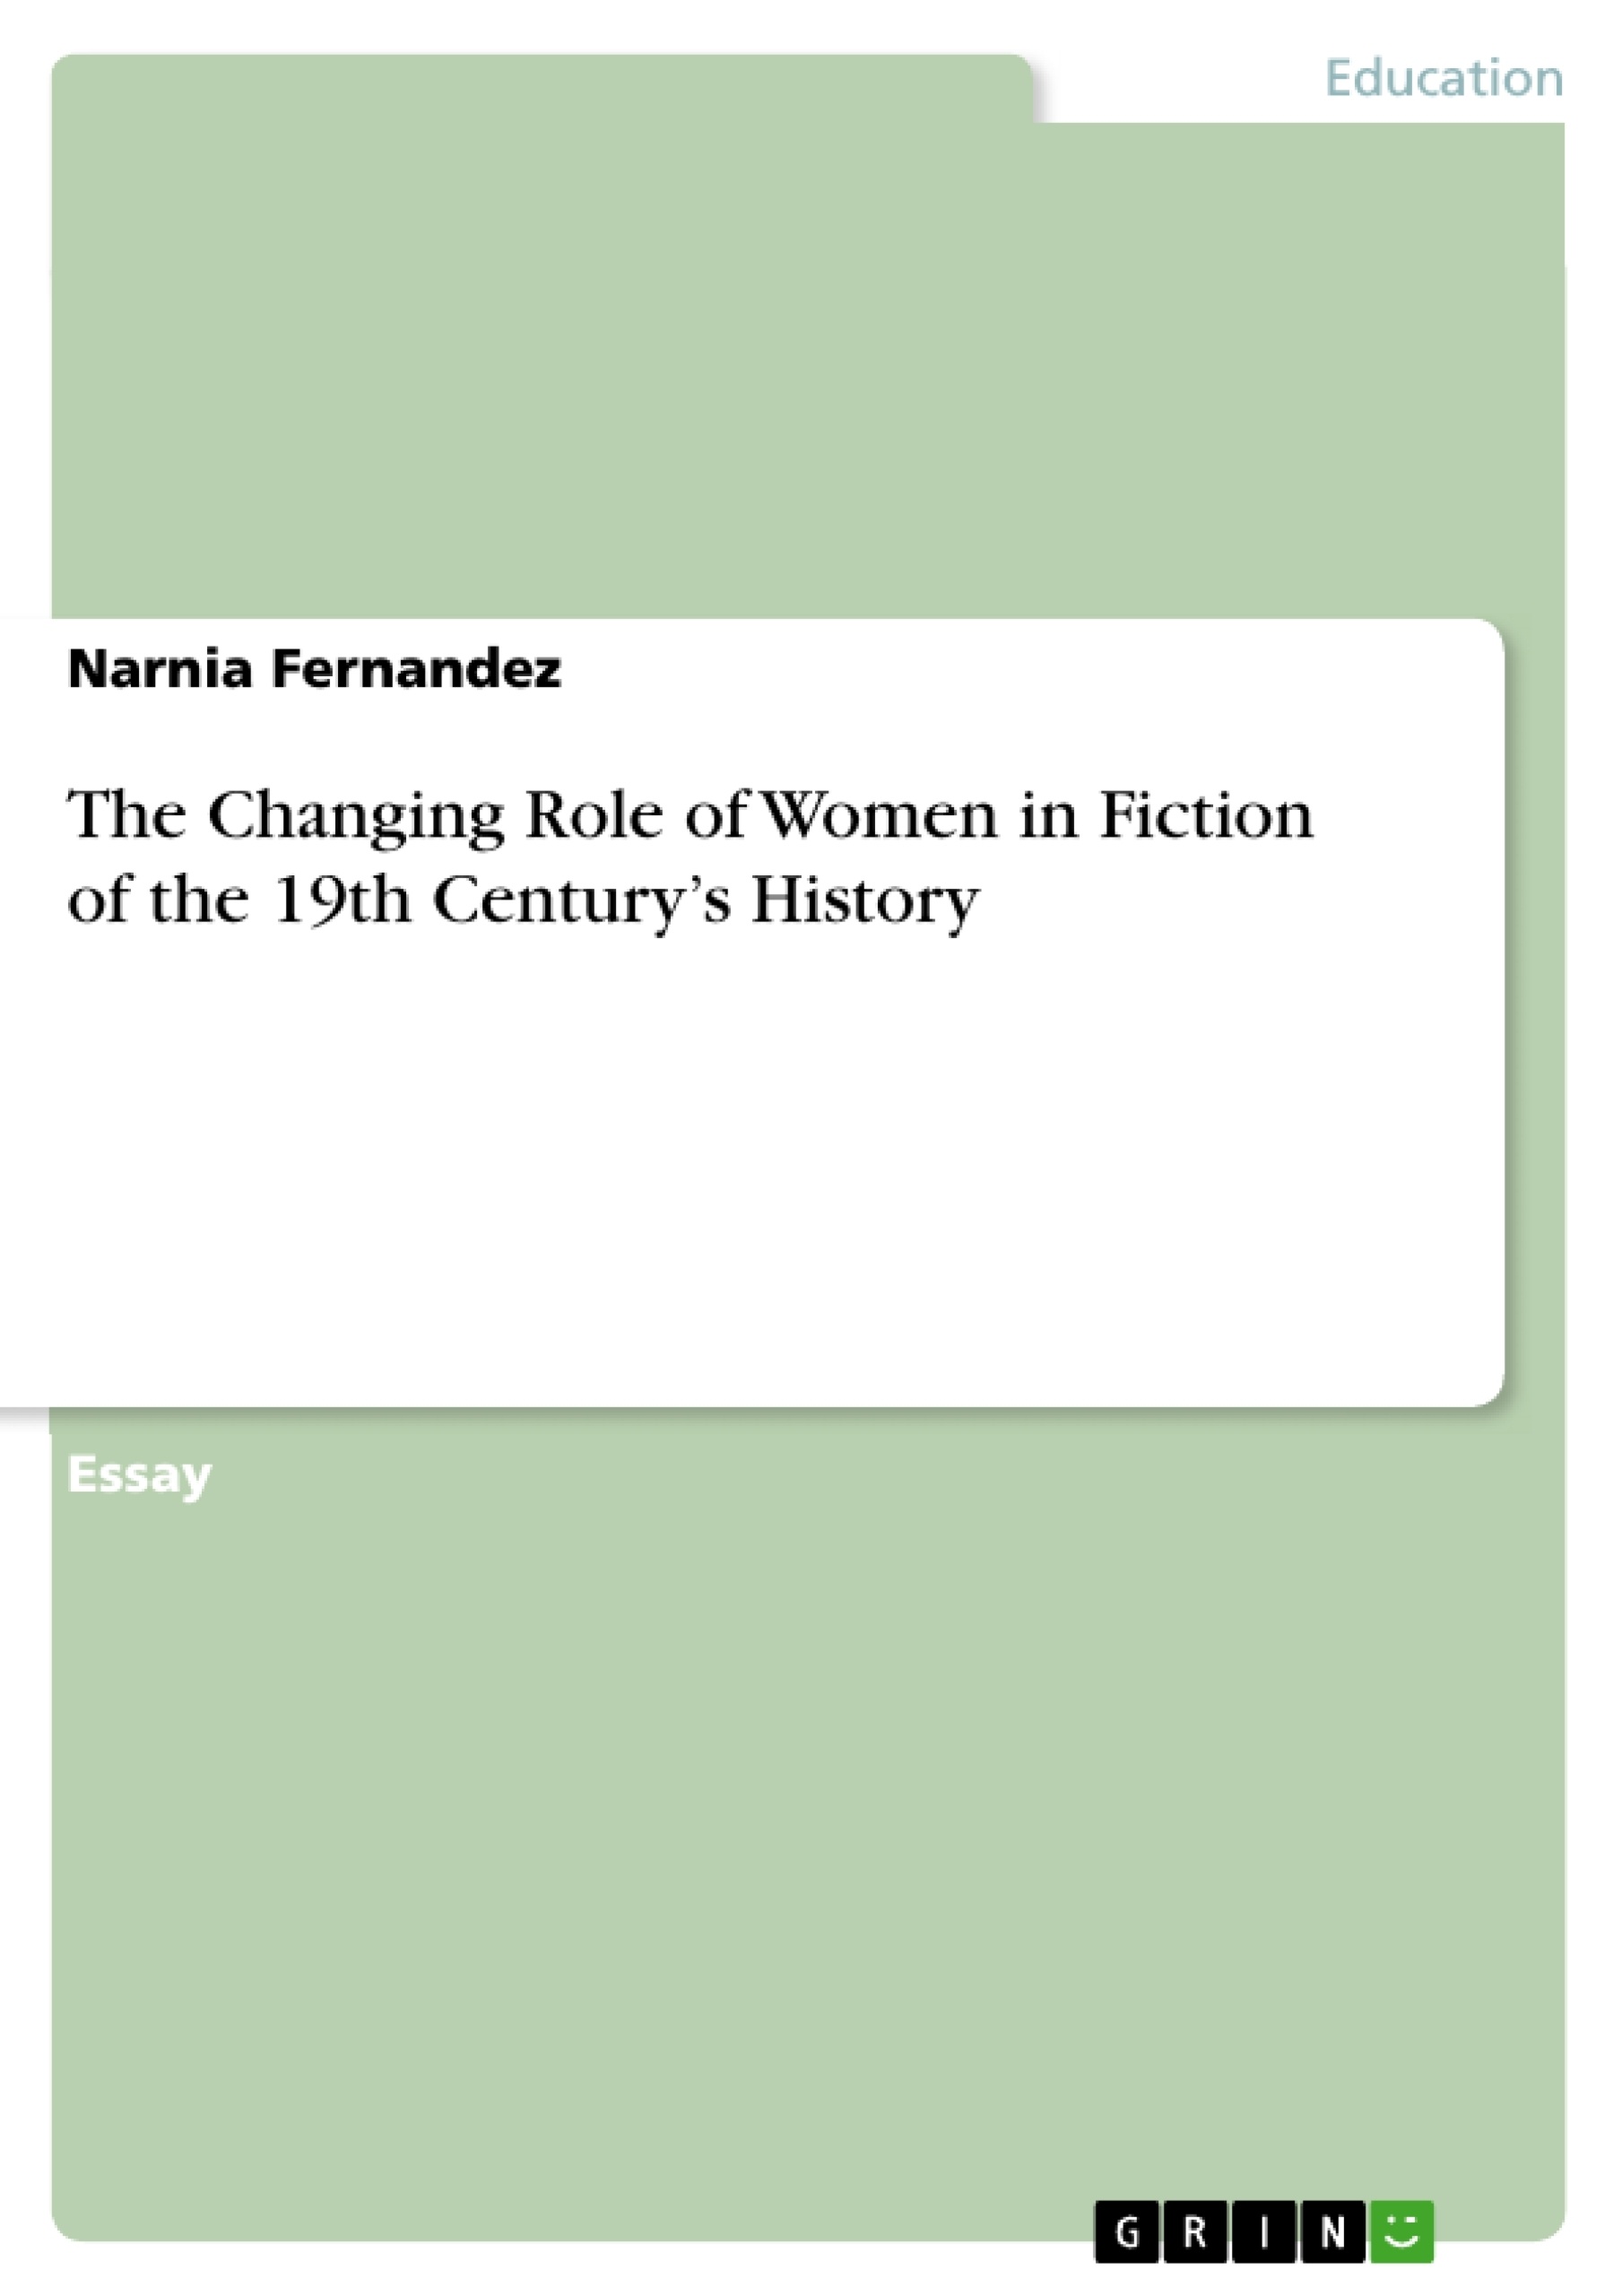 Título: The Changing Role of Women in Fiction of the 19th Century’s History